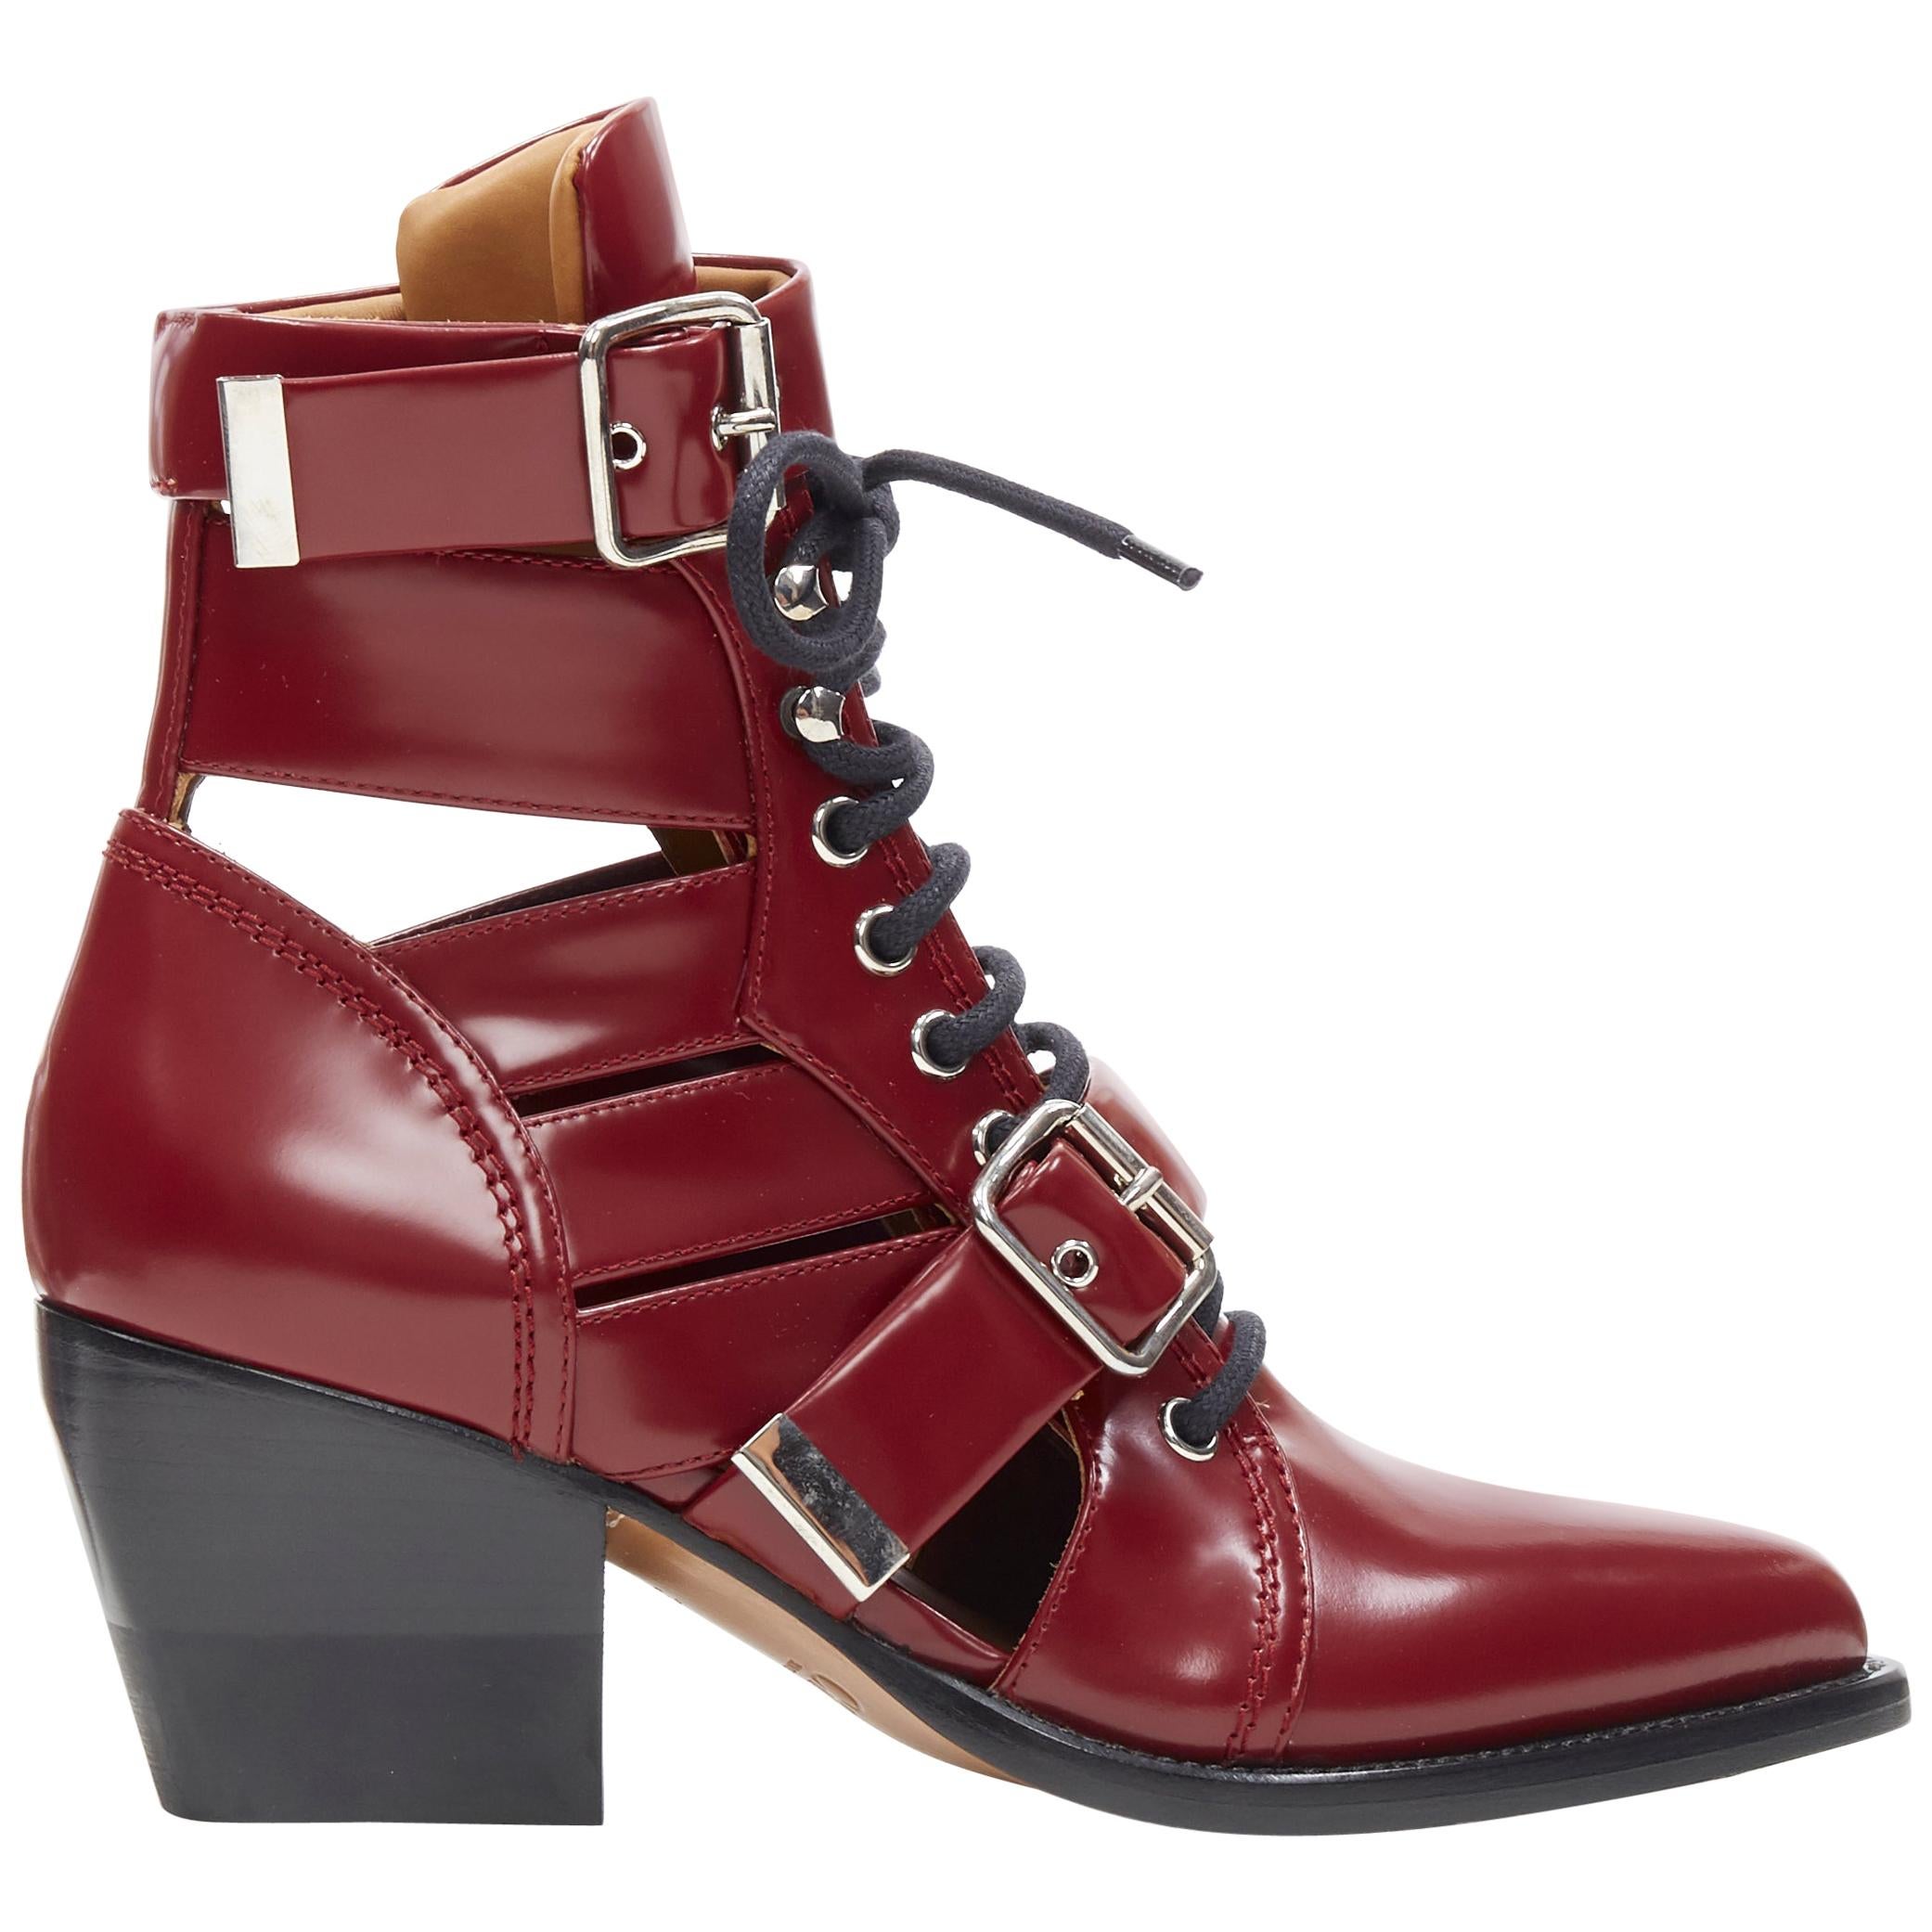 new CHLOE Rylee burgundy red leather cut out buckled pointy ankle boot EU39.5